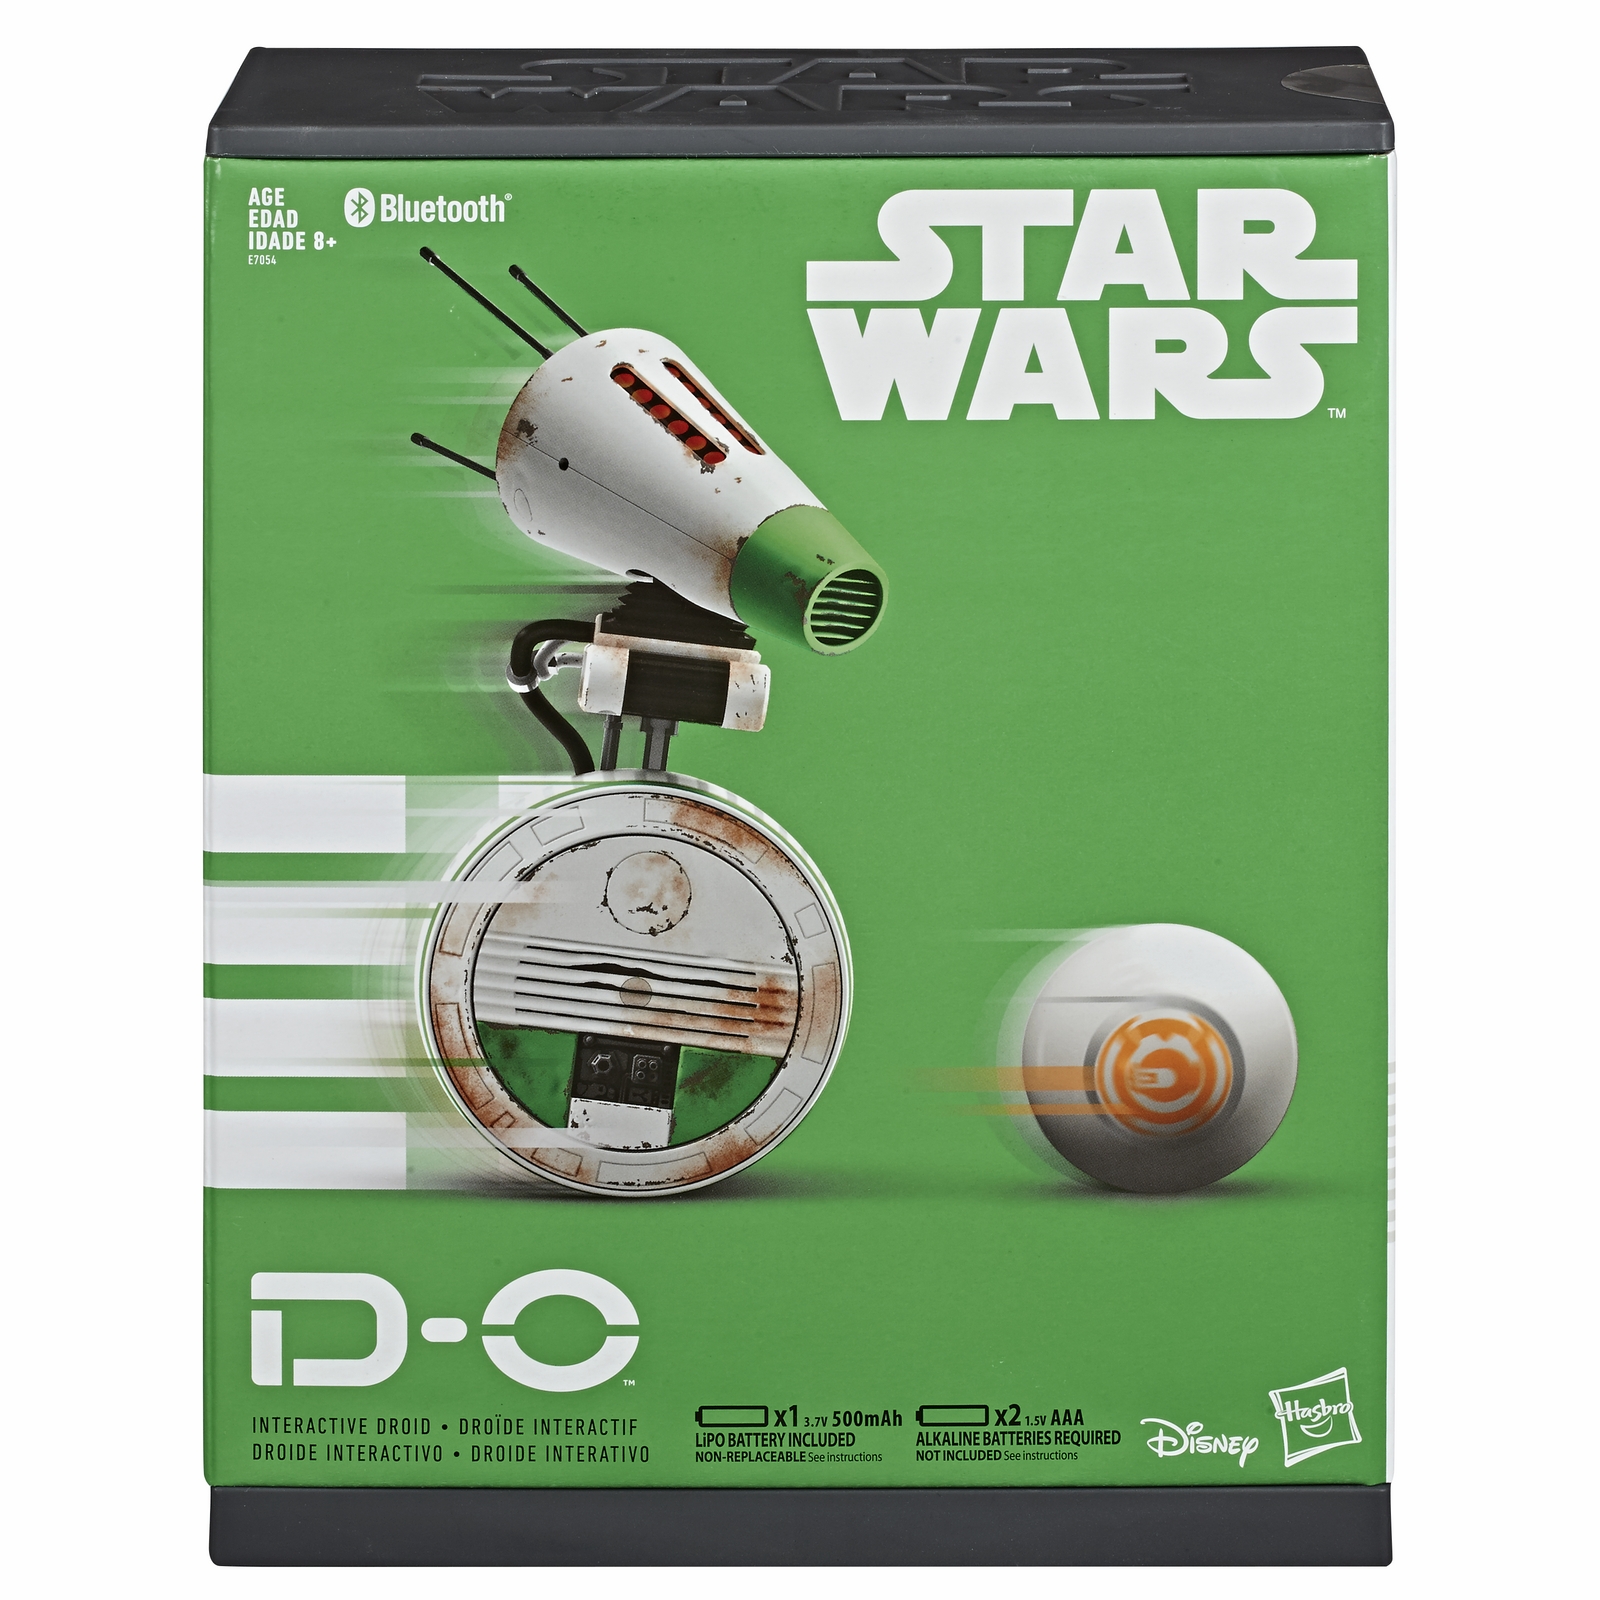 STAR WARS D-O INTERACTIVE DROID - pckging.jpg